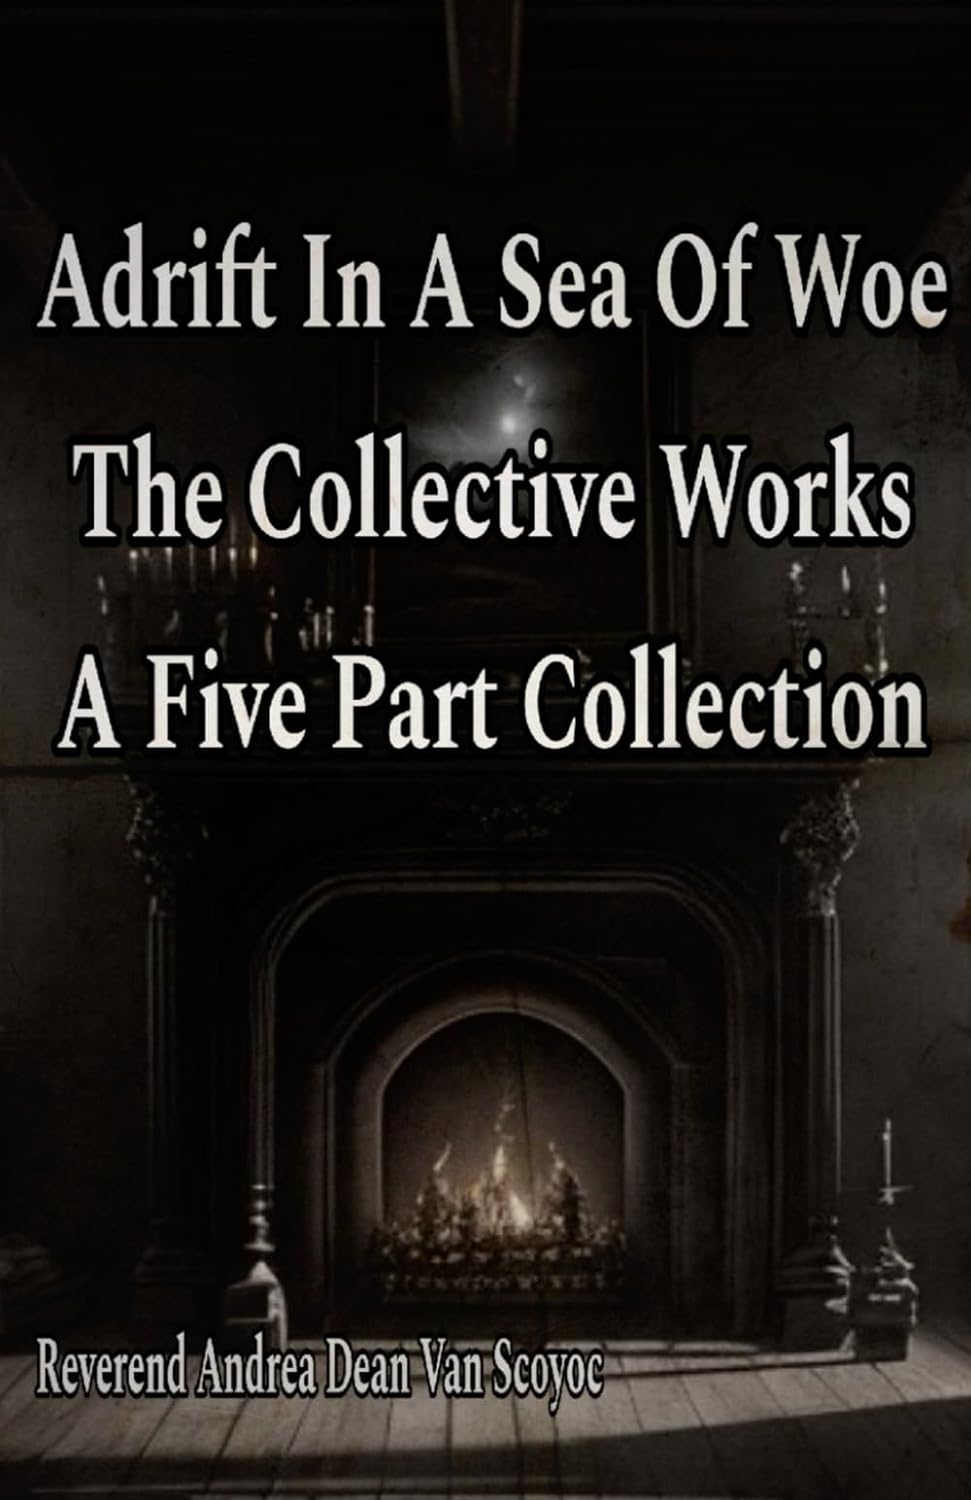 Adrift In A Sea of Woe - The Collective Works